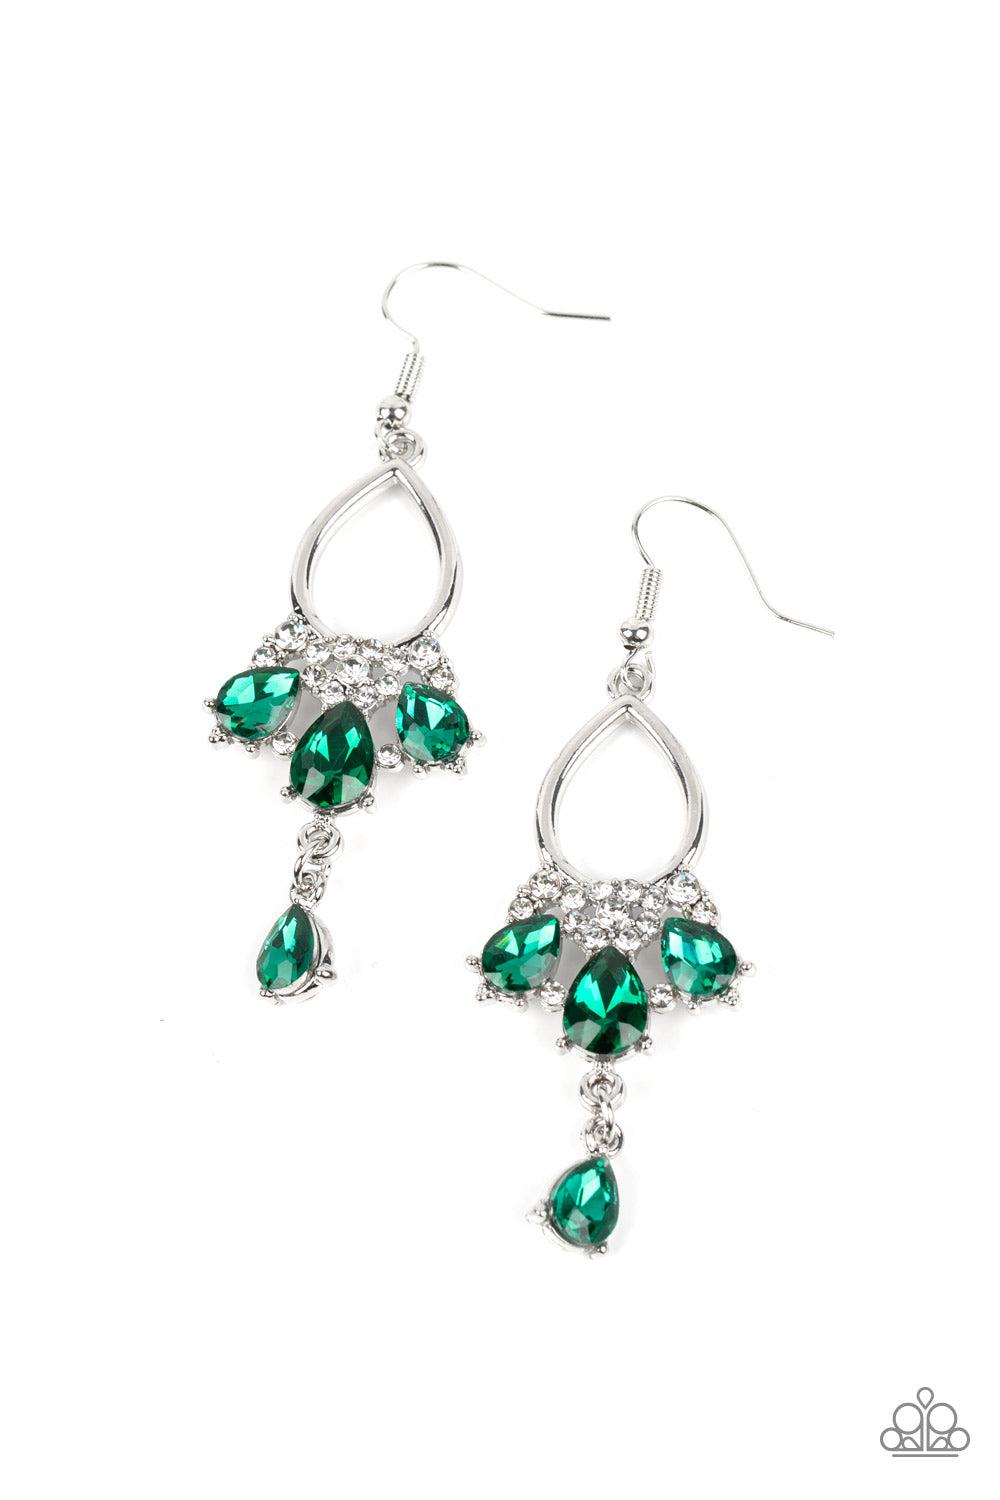 Coming in Clutch Green Rhinestone Earrings - Paparazzi Accessories- lightbox - CarasShop.com - $5 Jewelry by Cara Jewels